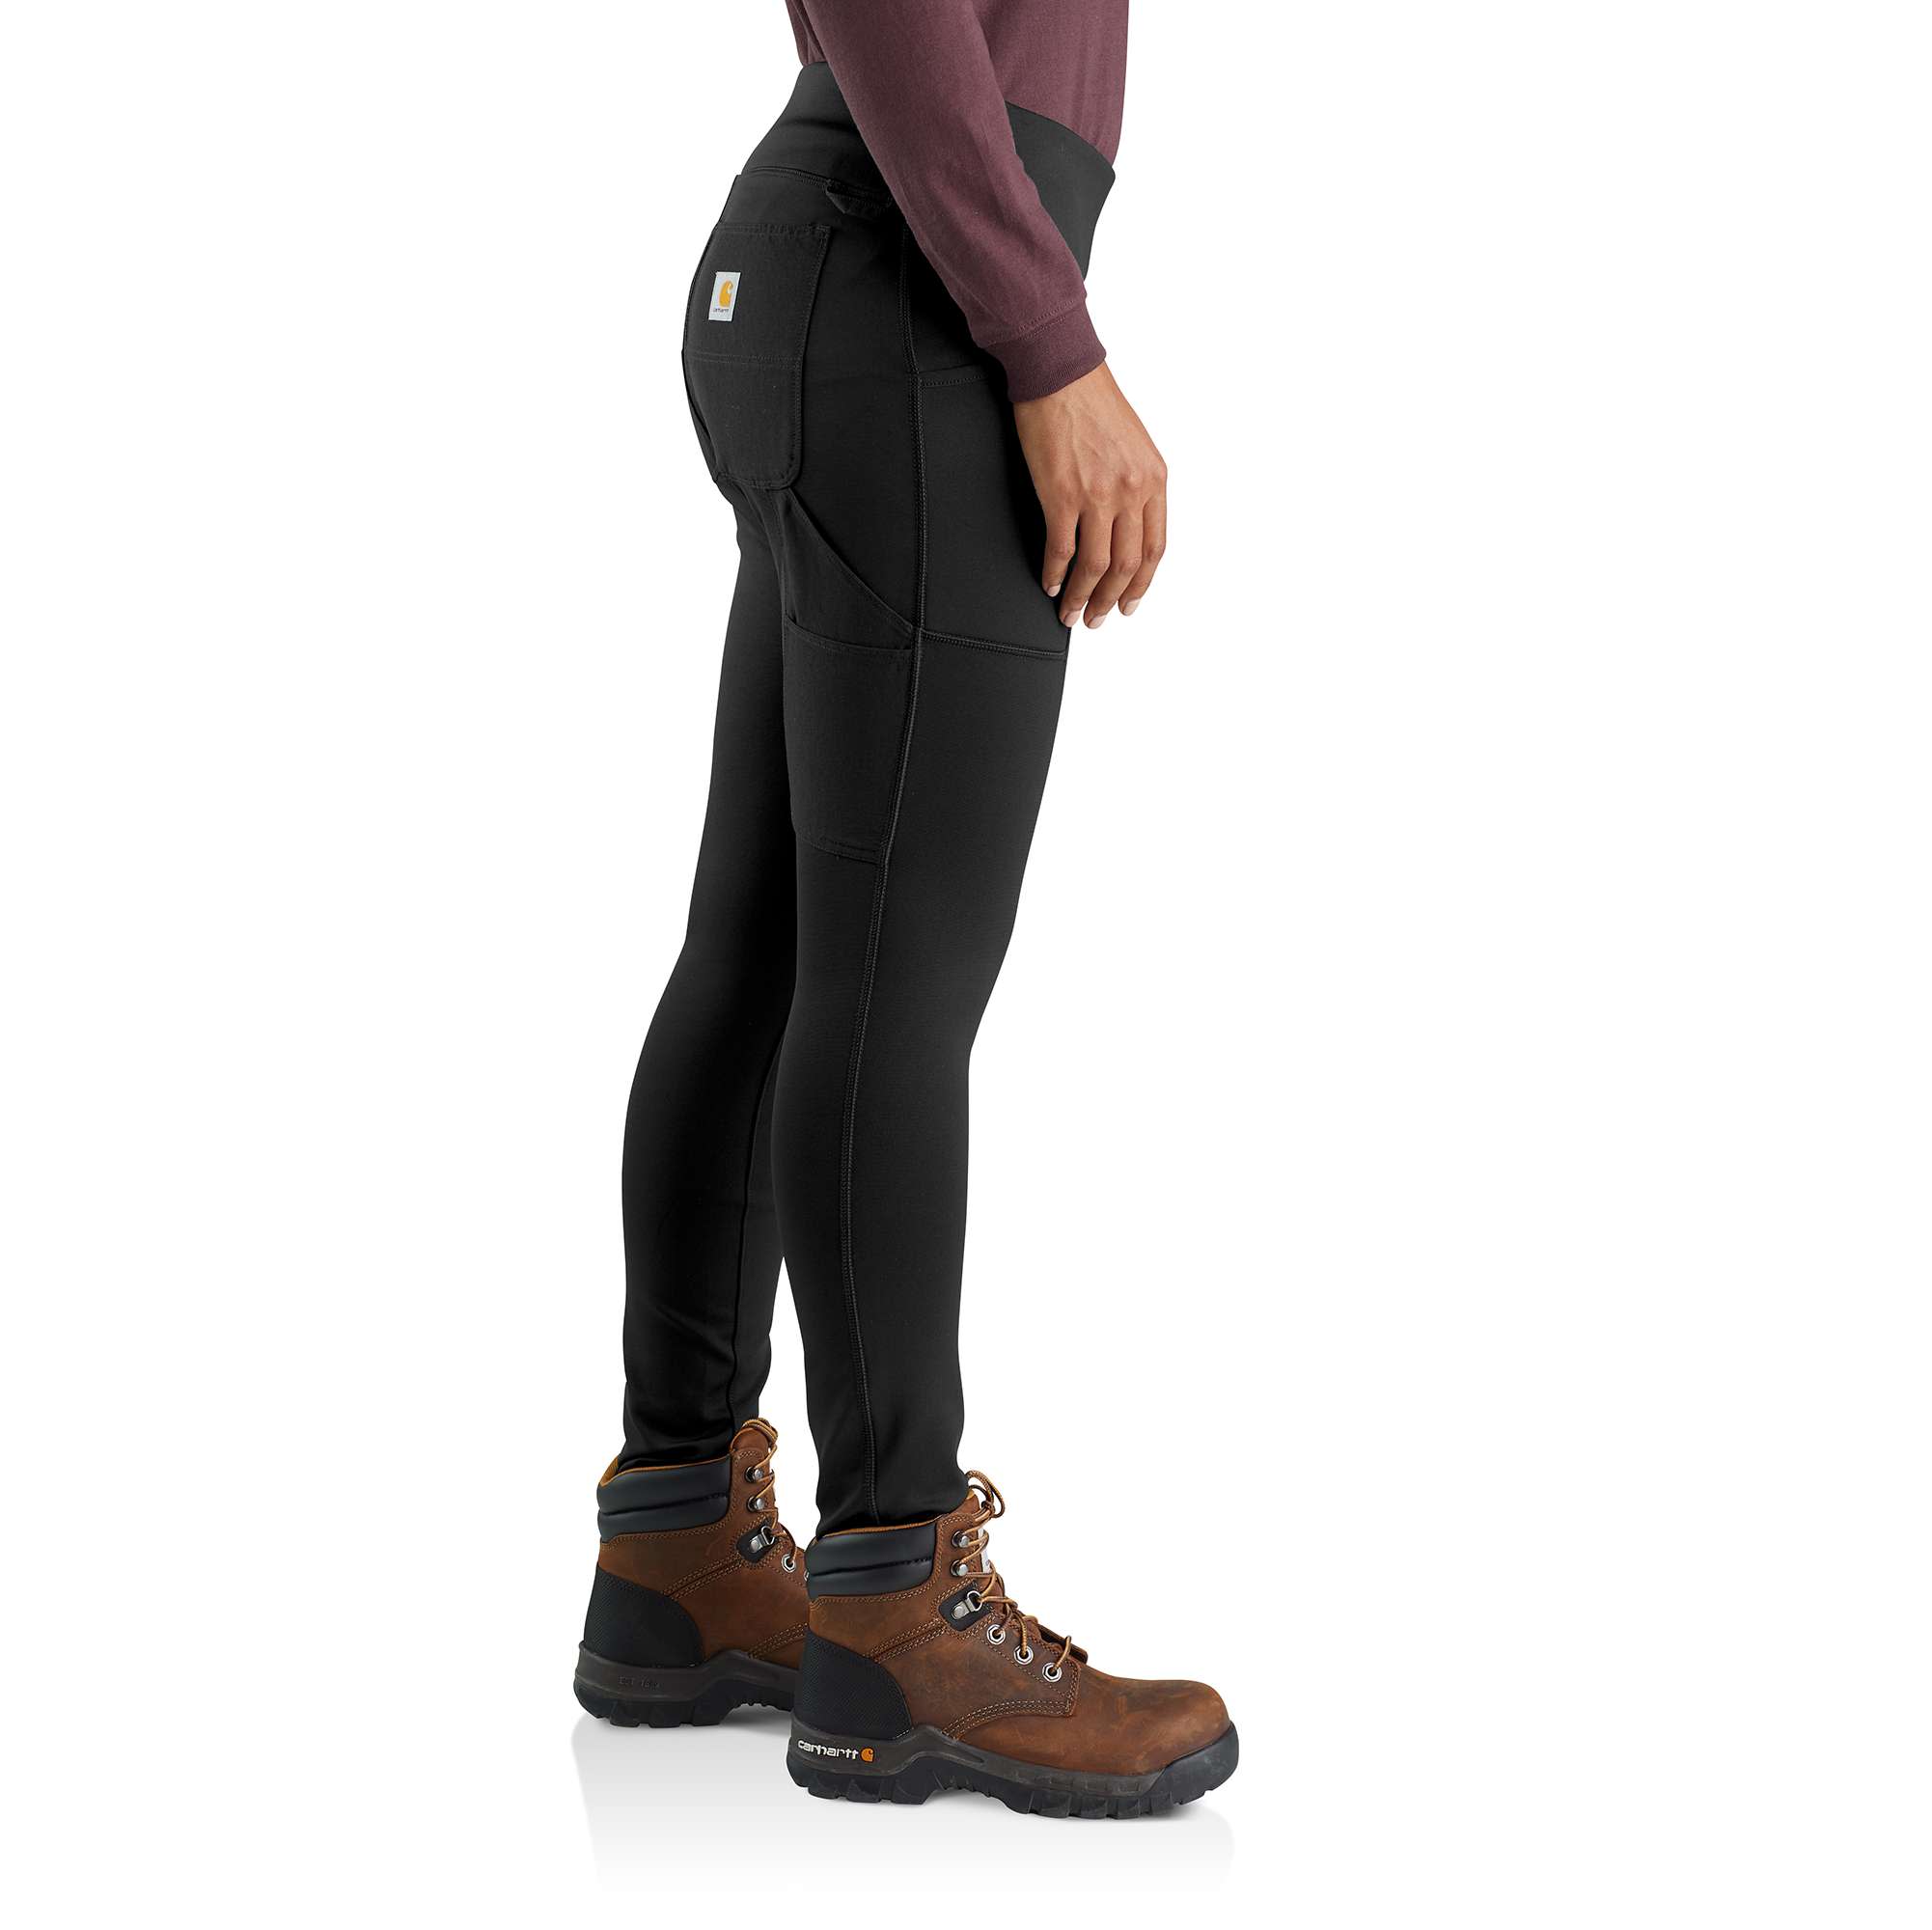 Review] Women's Utility Leggings (Lightweight and Original) by